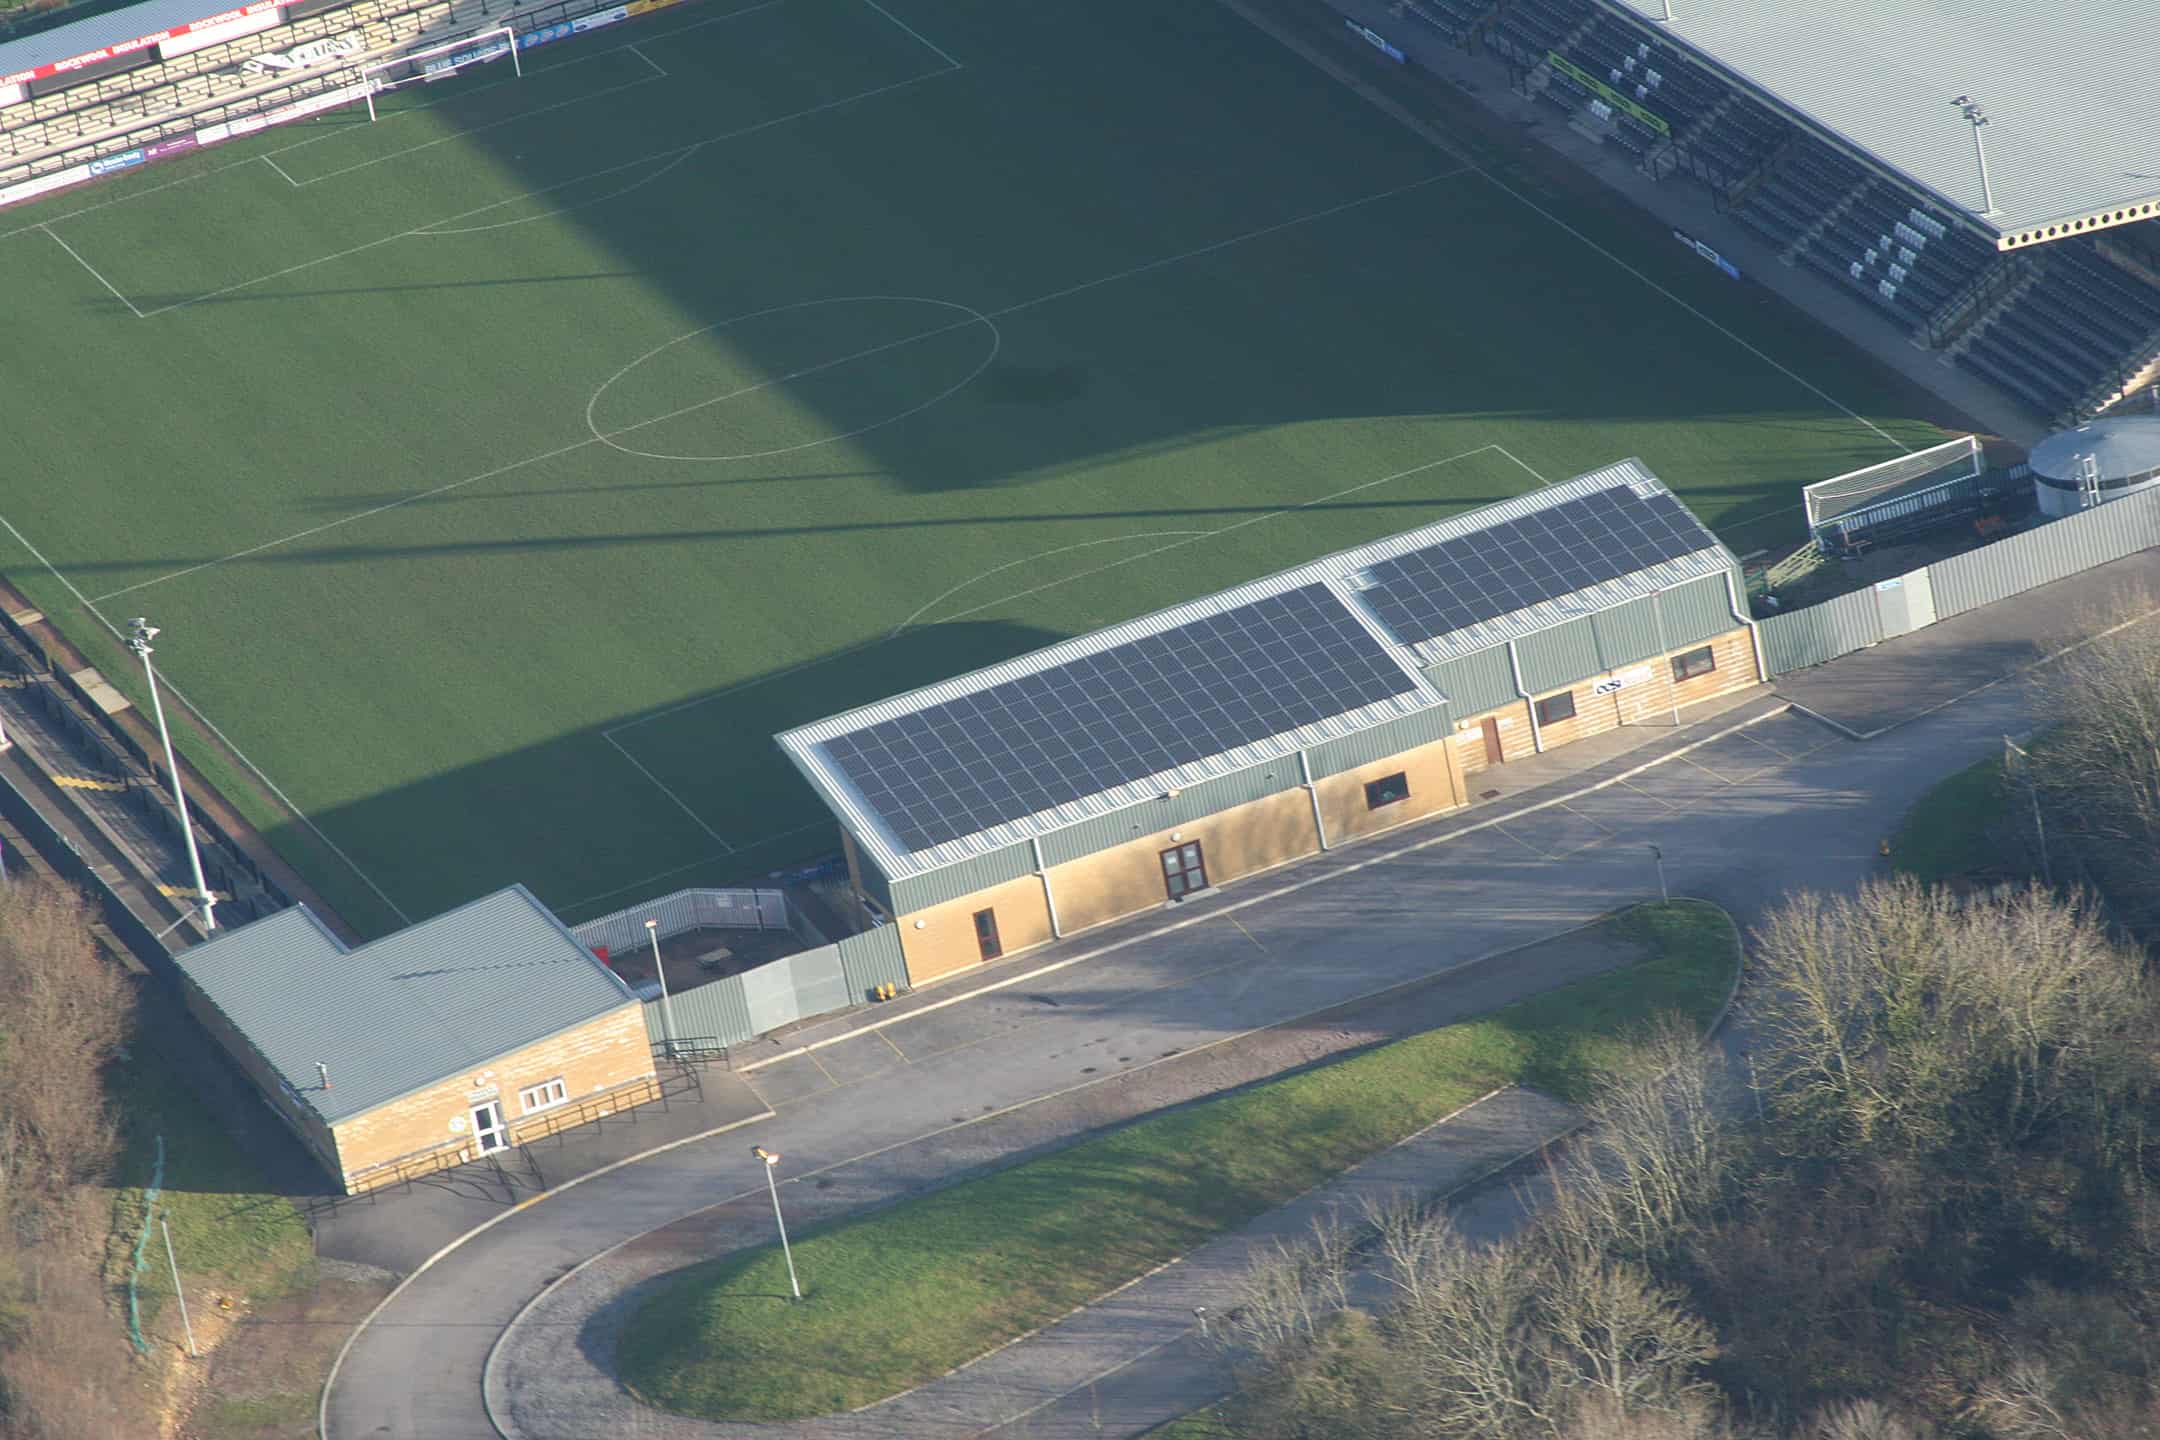 Download this Winning Goal Forest Green Rovers Will Use The Solar Array Power picture